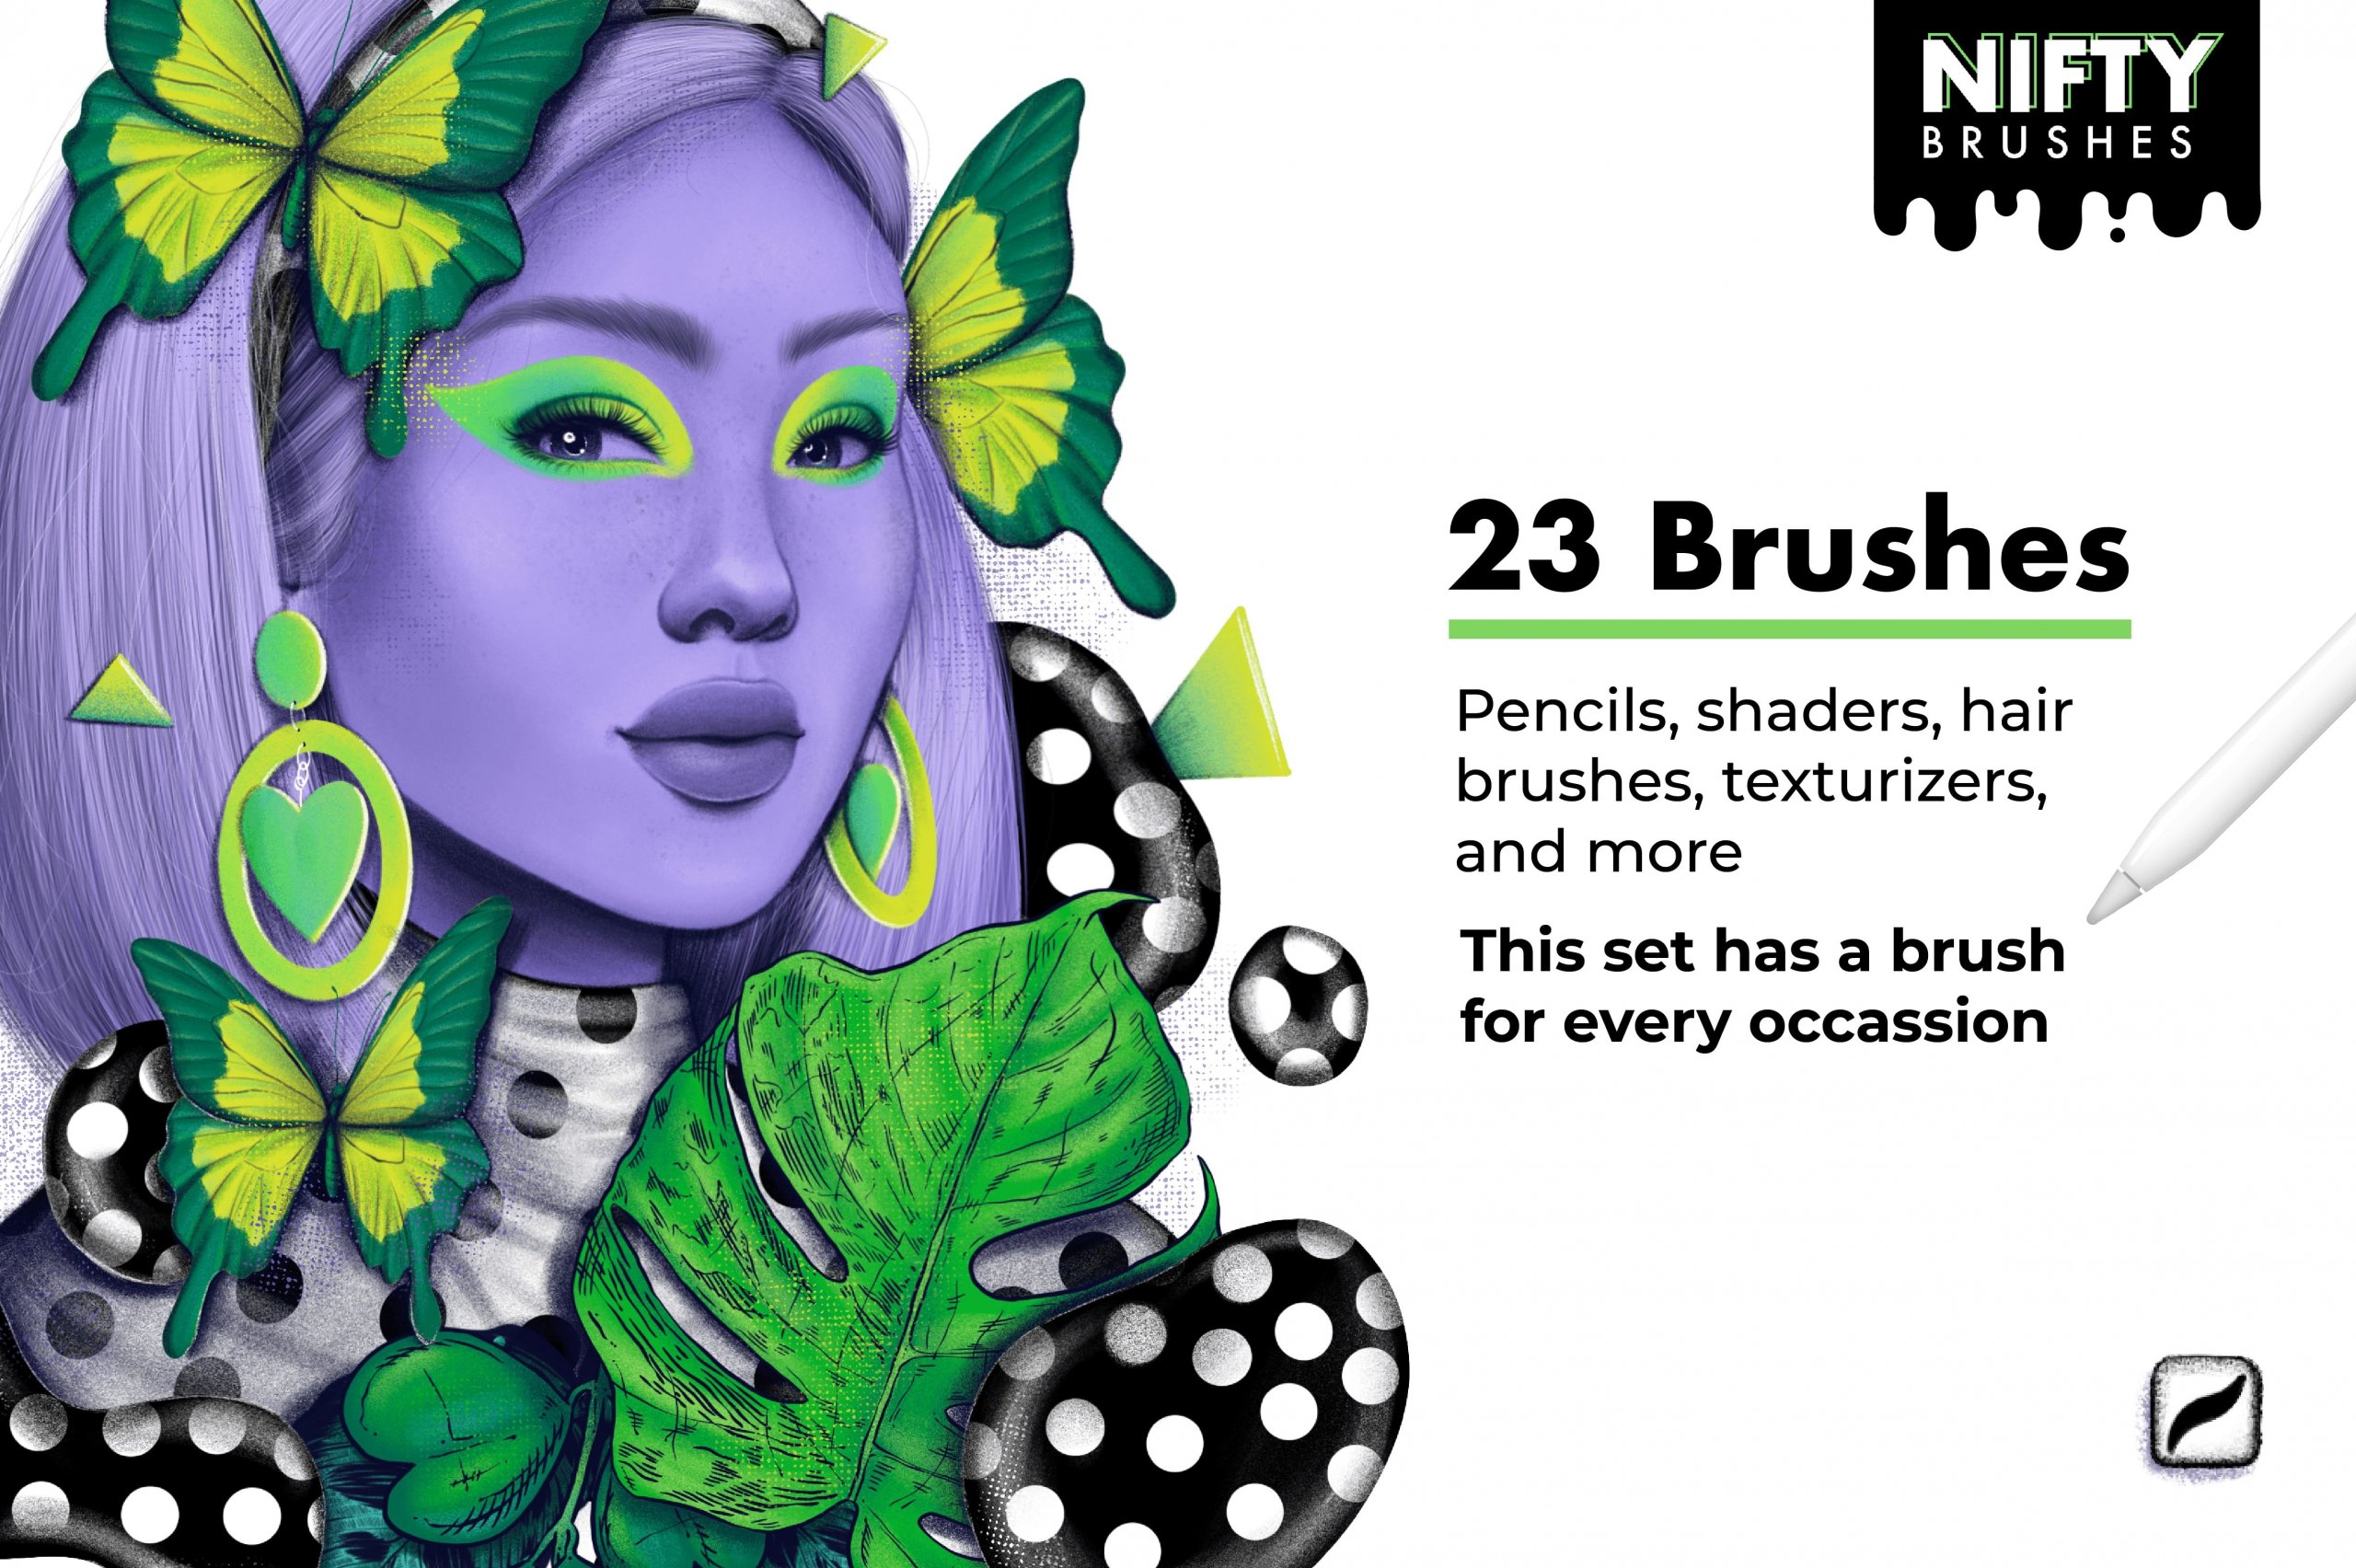 23 Nifty Brushes for Procreate